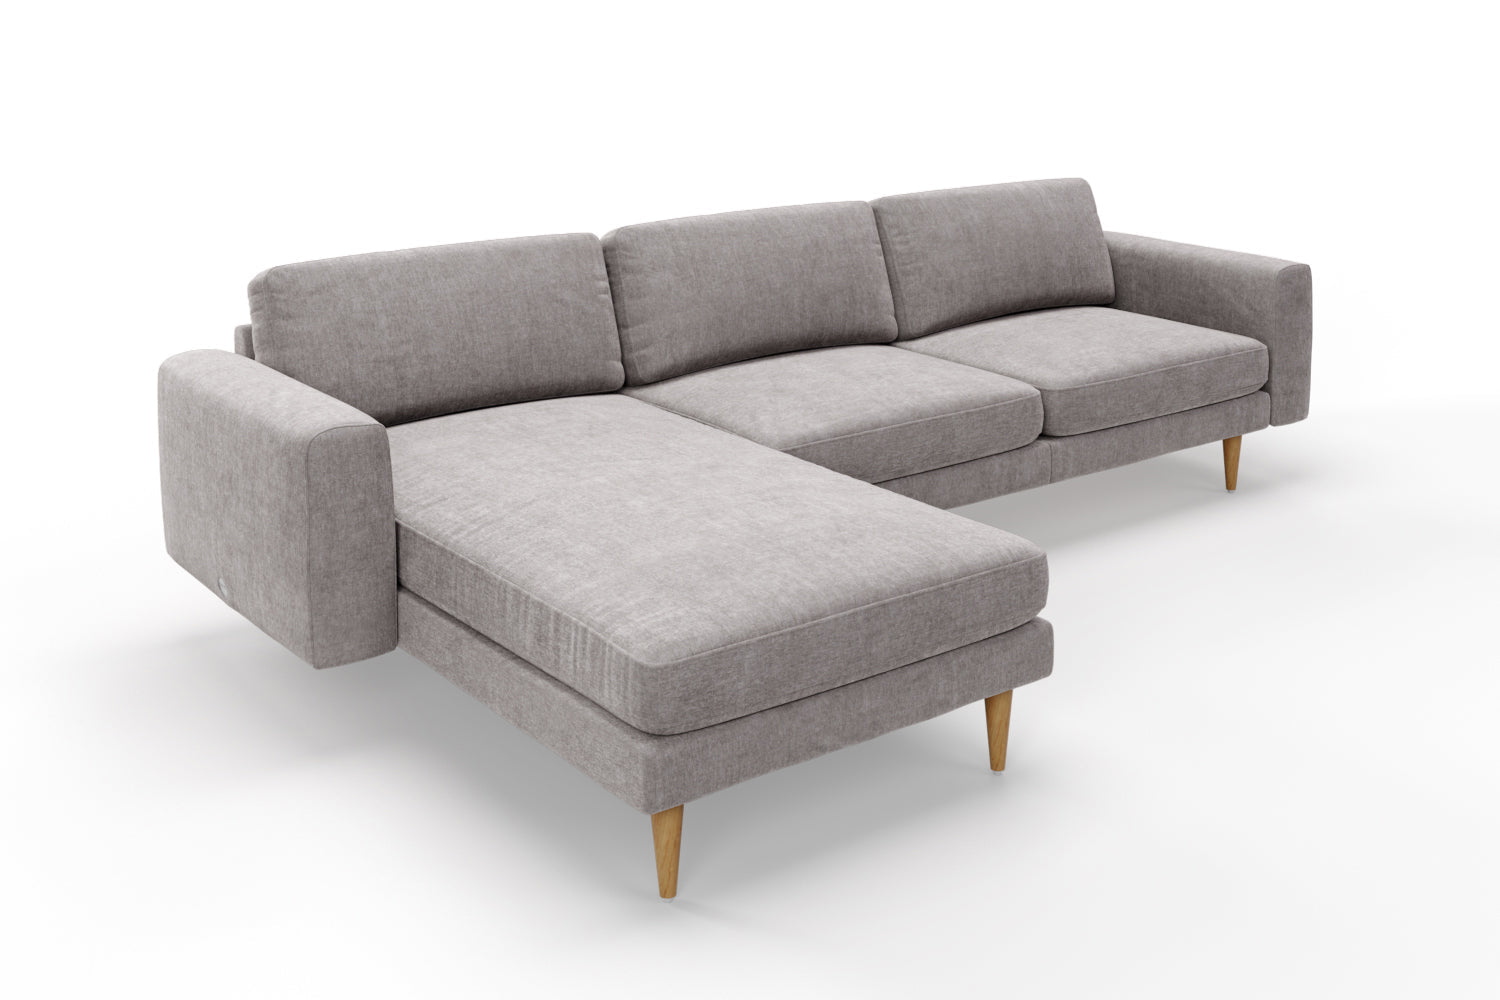 SNUG | The Big Chill Left Hand Chaise Sofa in Mid Grey